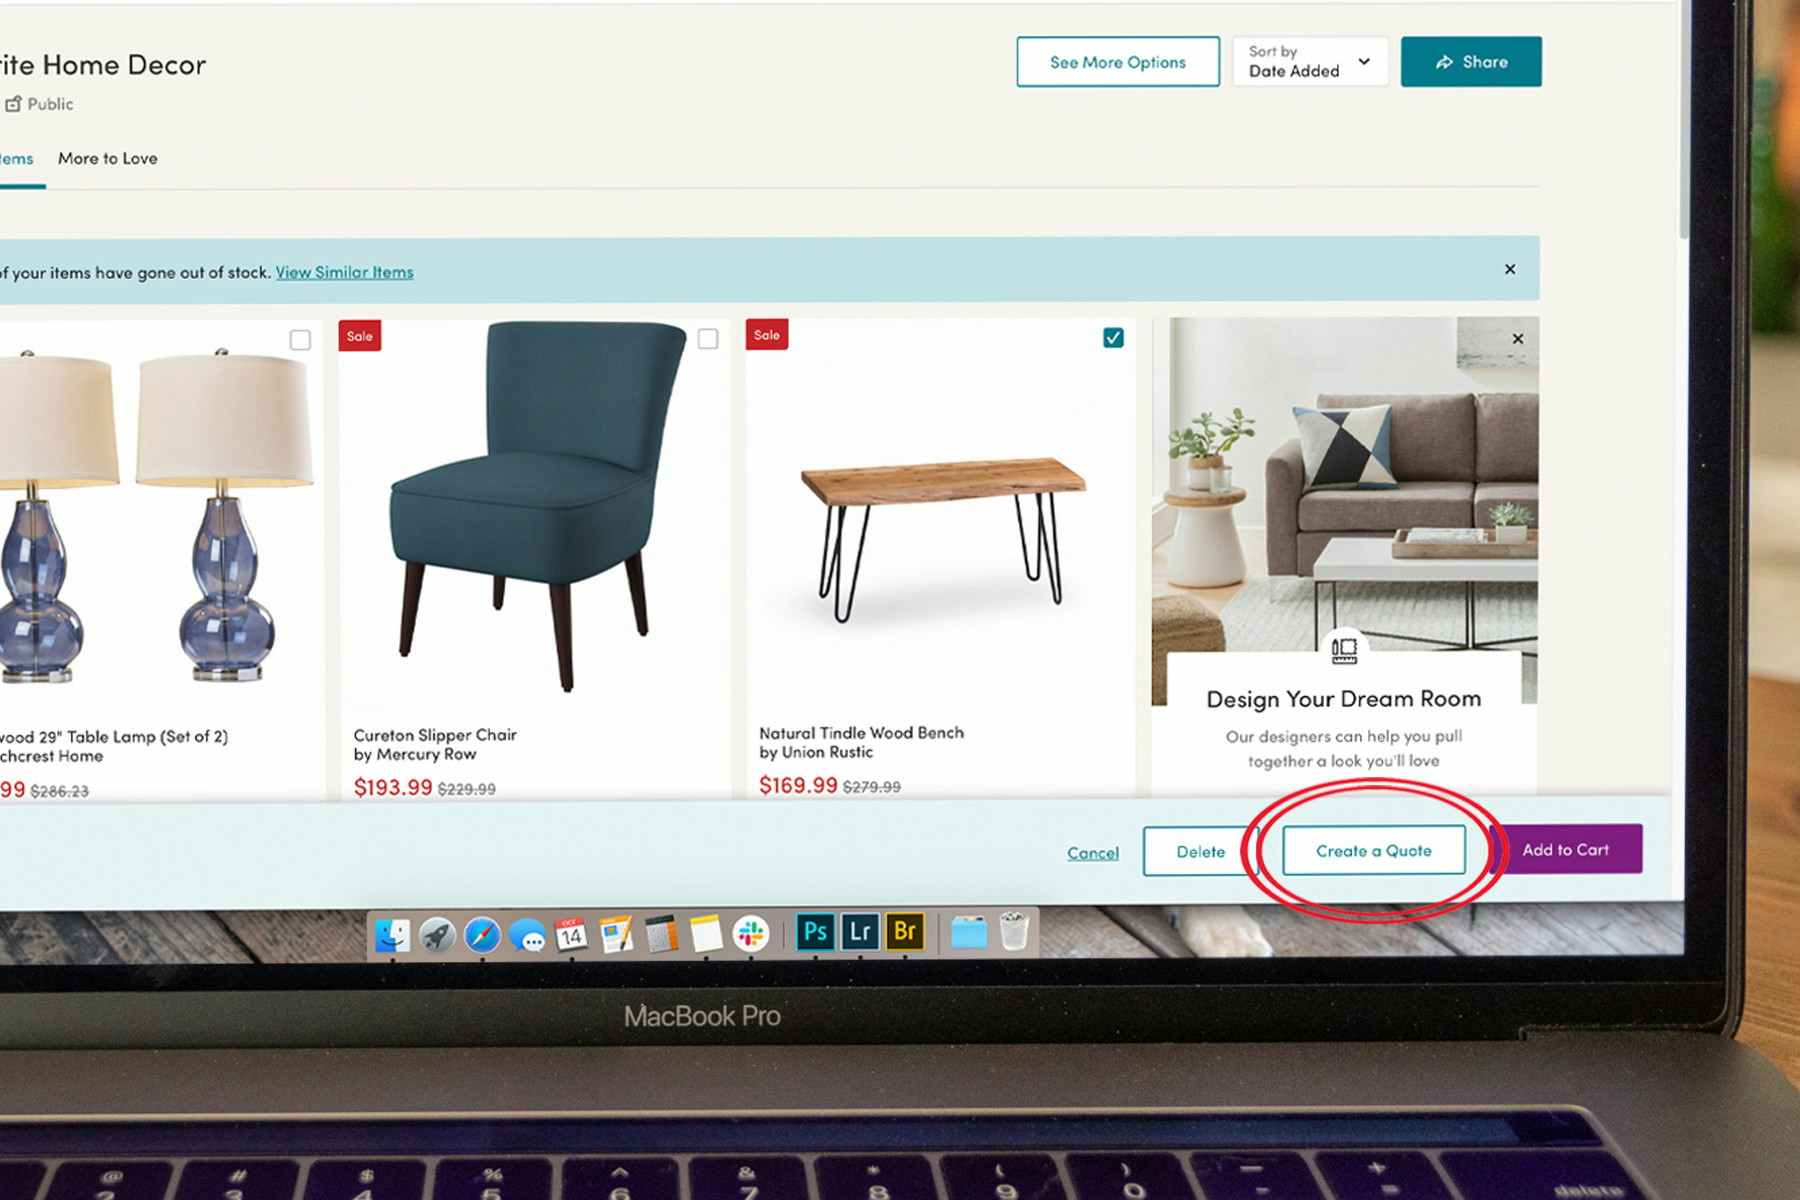 Lock in a price with Wayfair professional.